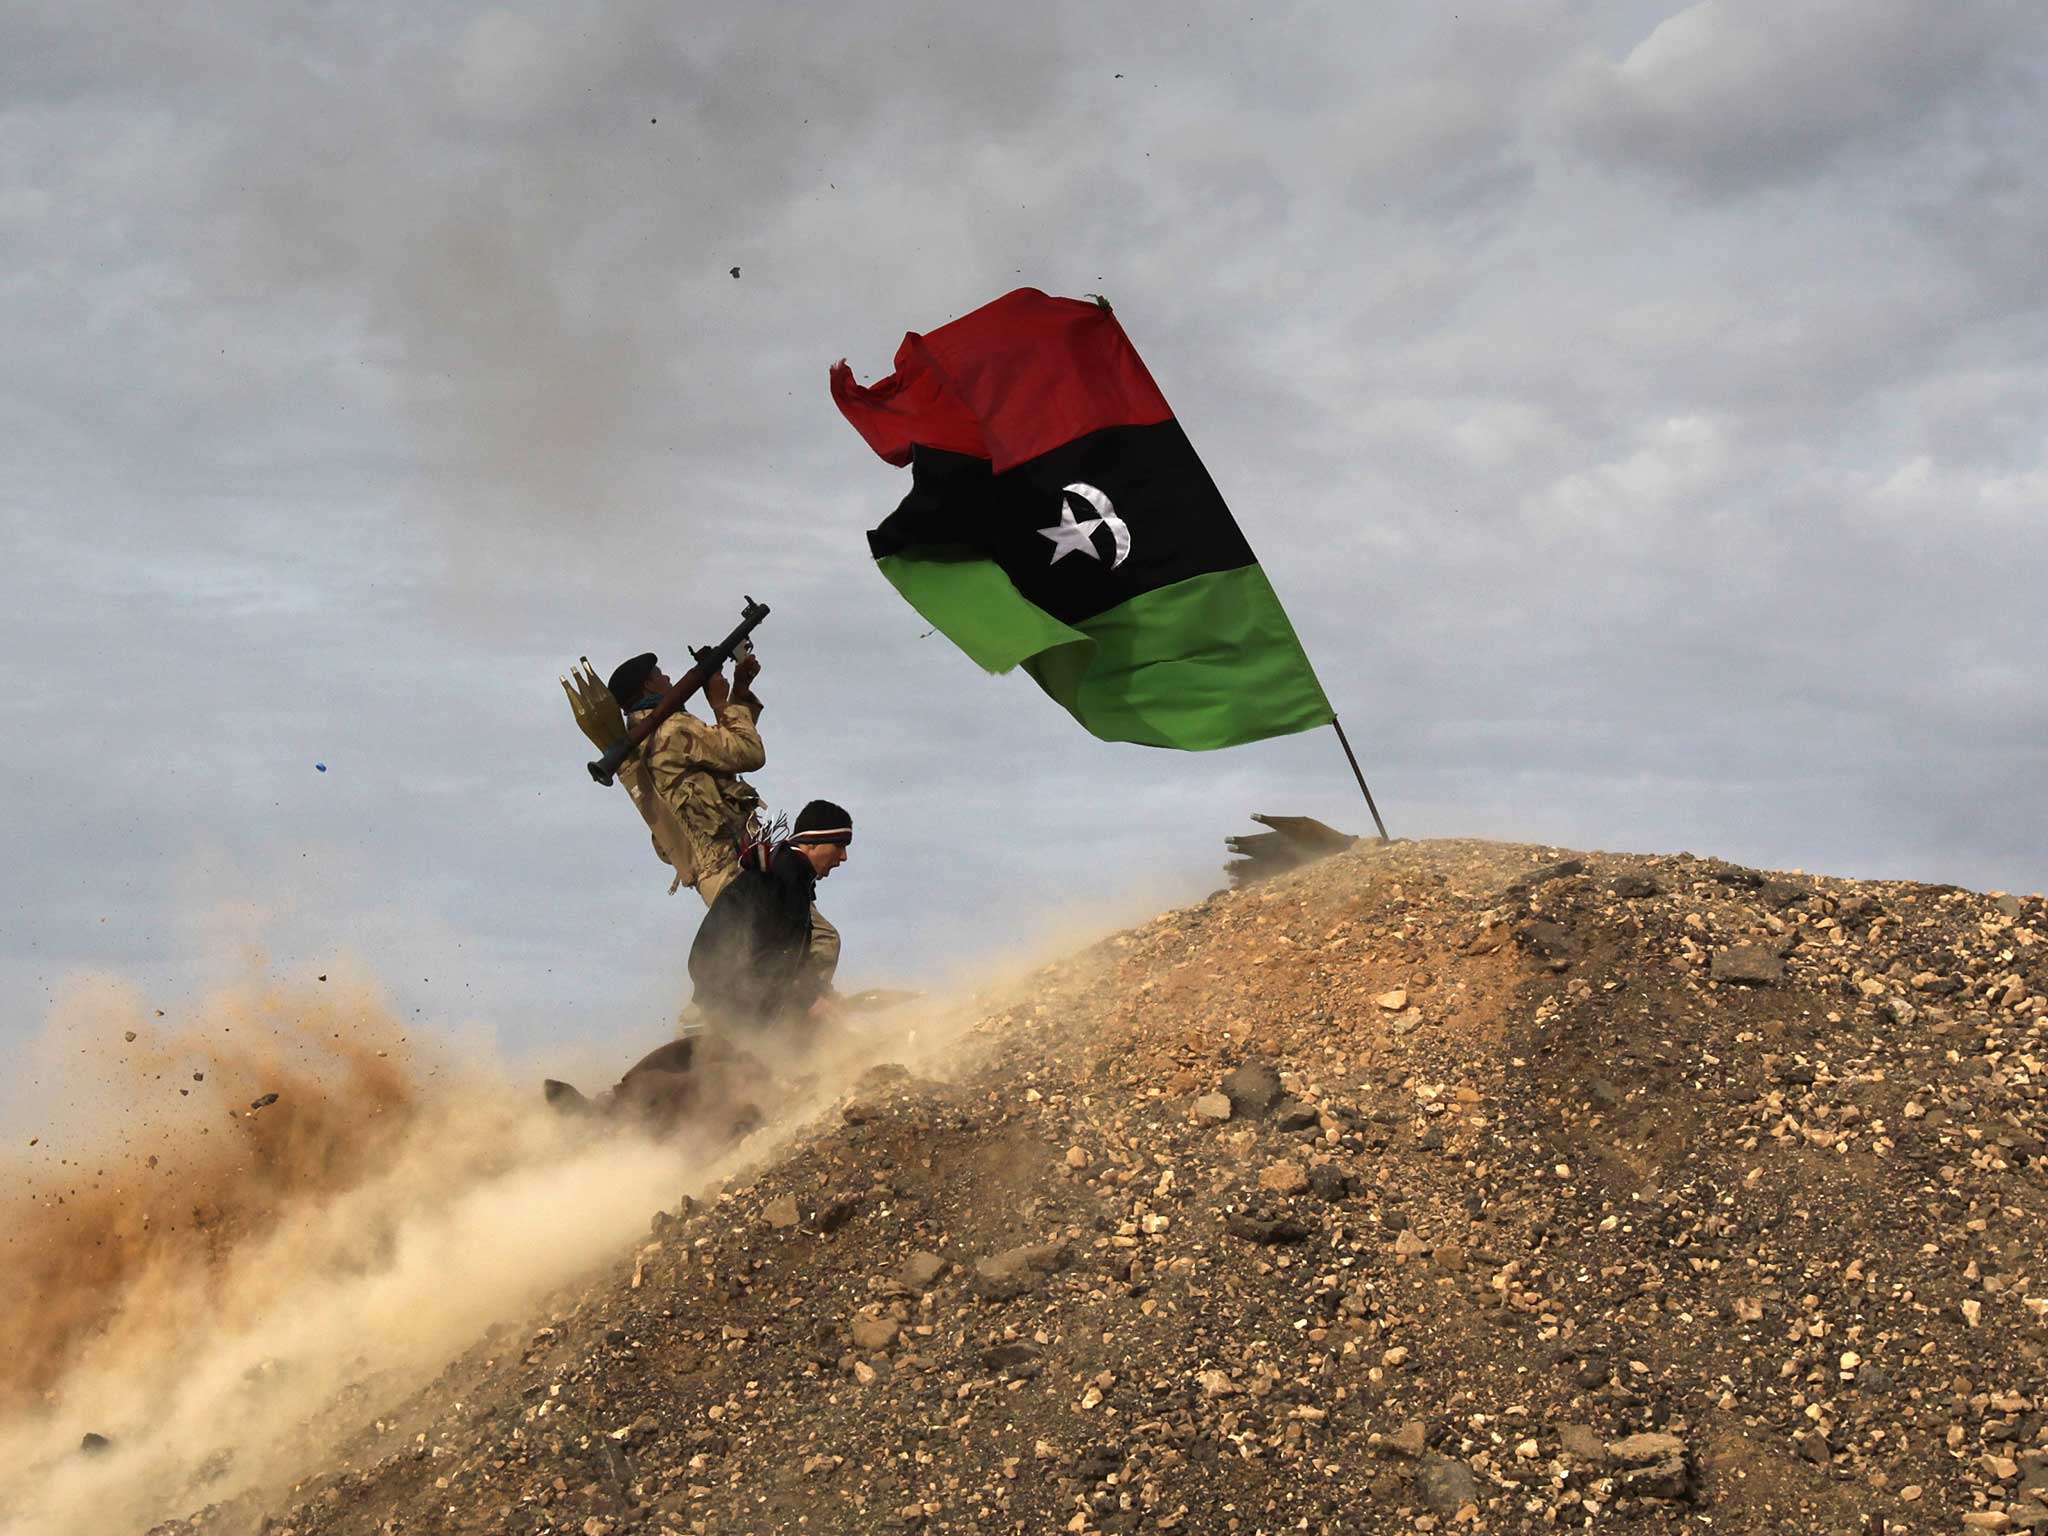 Rebels fire a rocket-propelled grenade at a Libyan air force fighter jet near the Mediterrannean town of Ra’s Lanuf, 2011